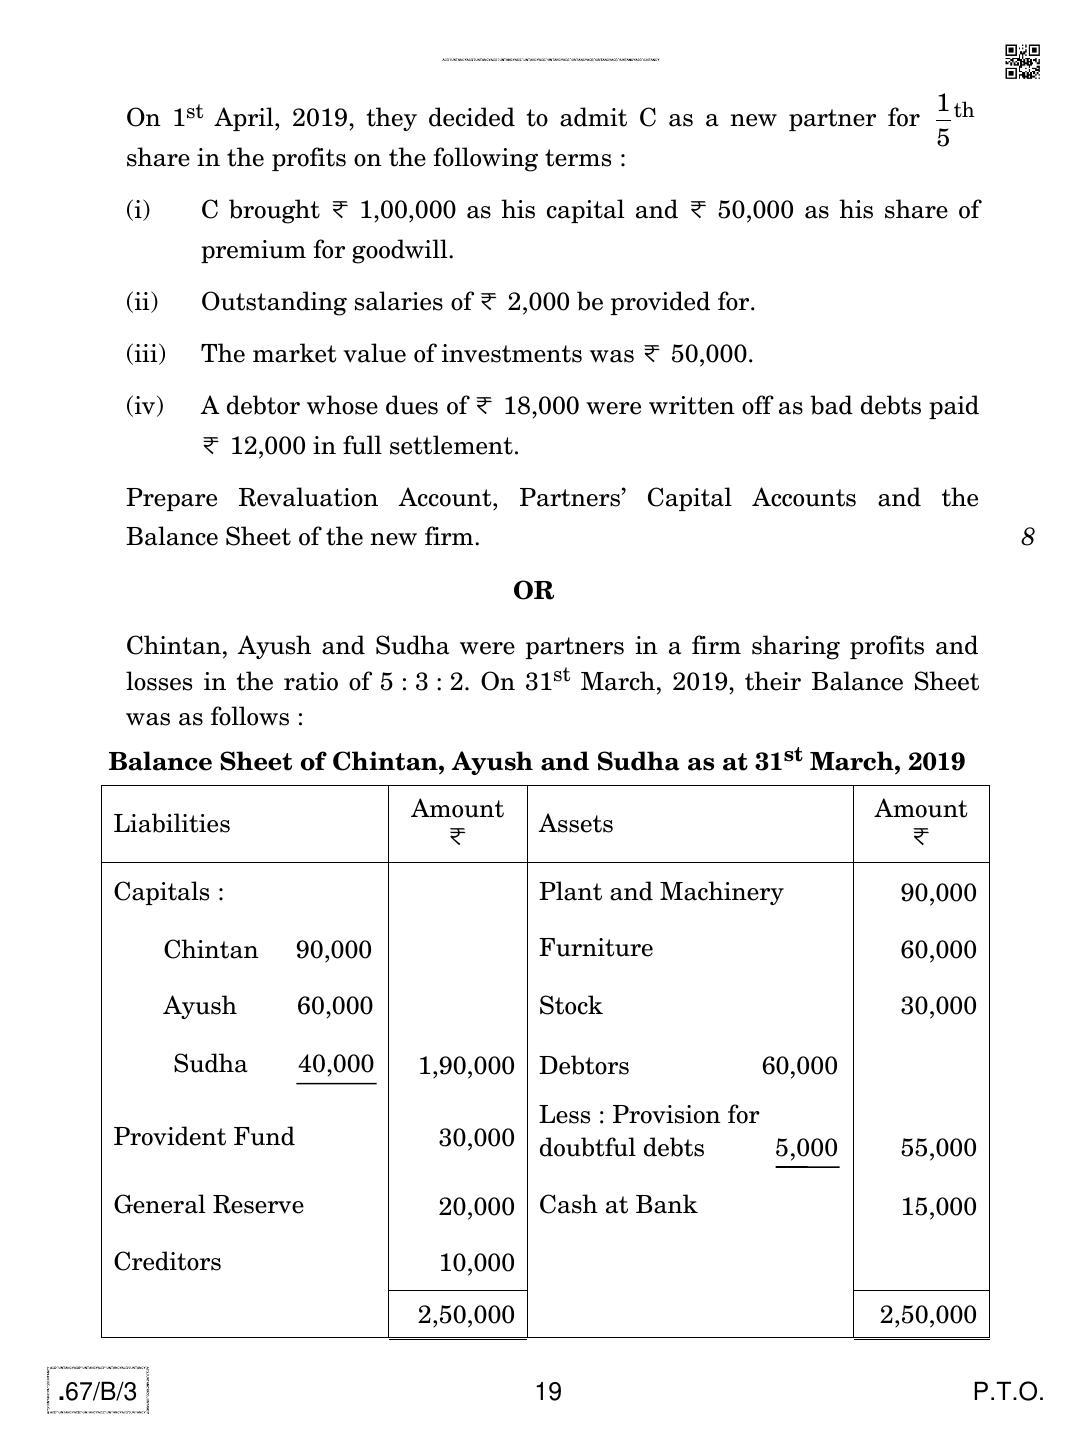 CBSE Class 12 67-C-3 - Accountancy 2020 Compartment Question Paper - Page 19